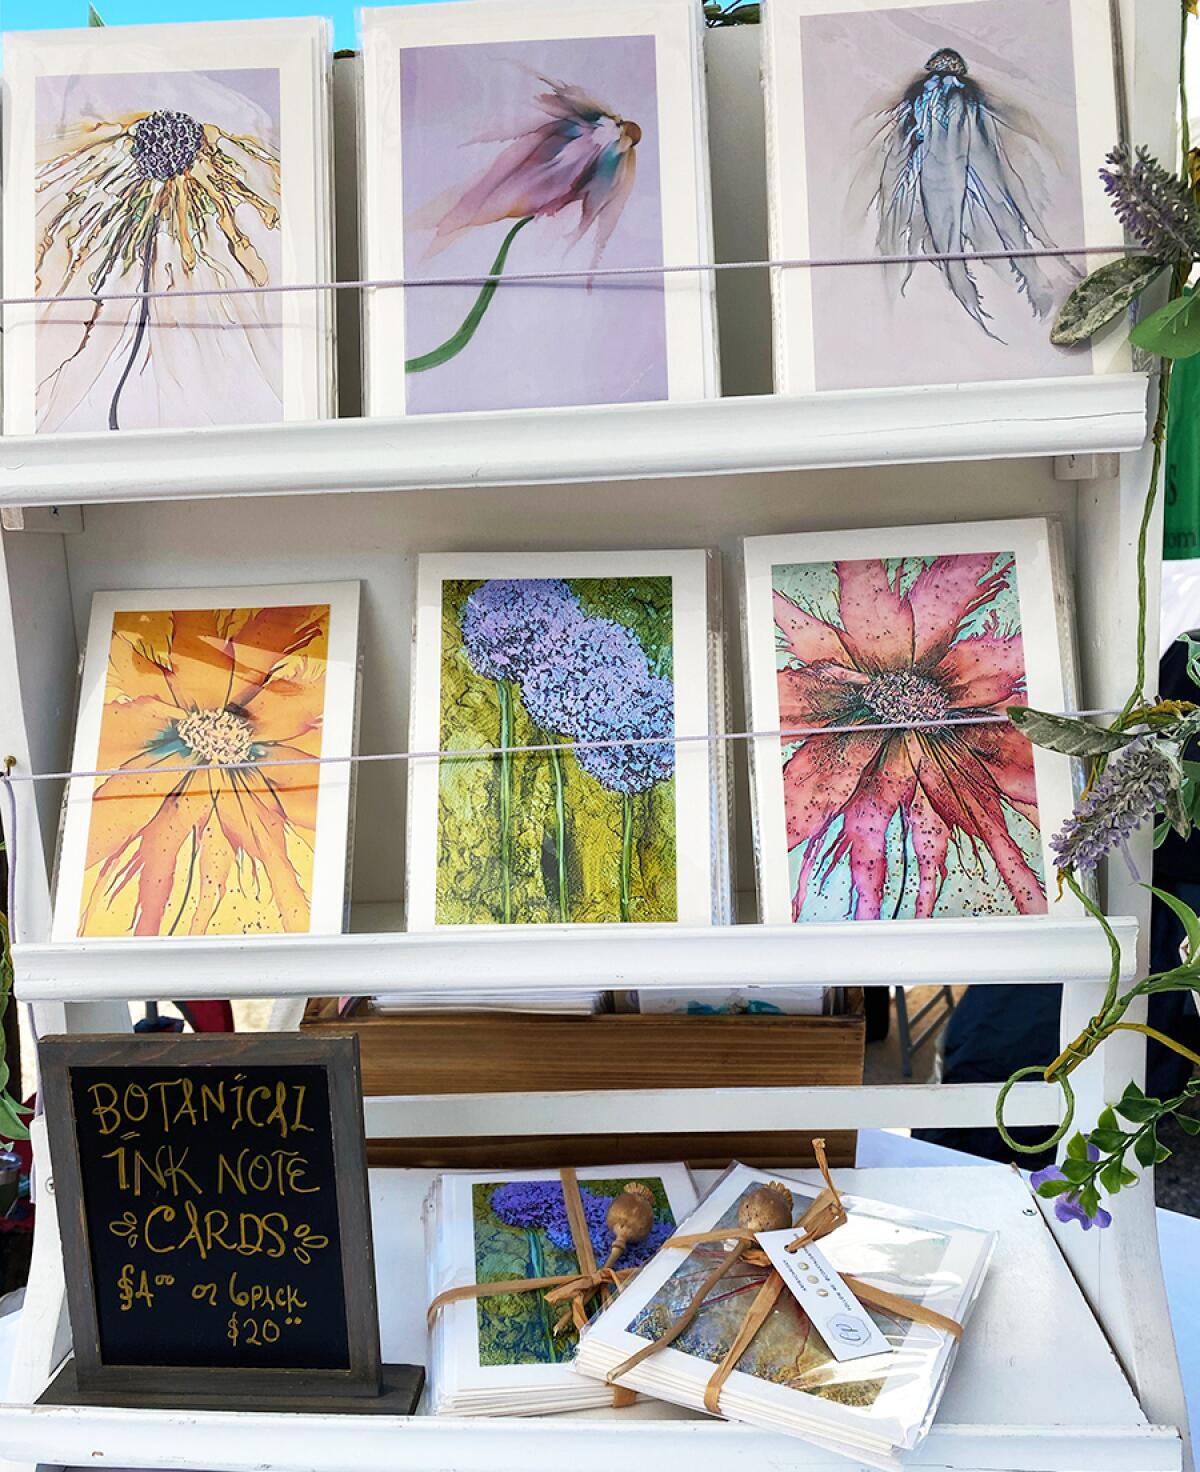 Botanical ink note cards are among handcrafted items sold at the Artisan Market at Old Poway Park.